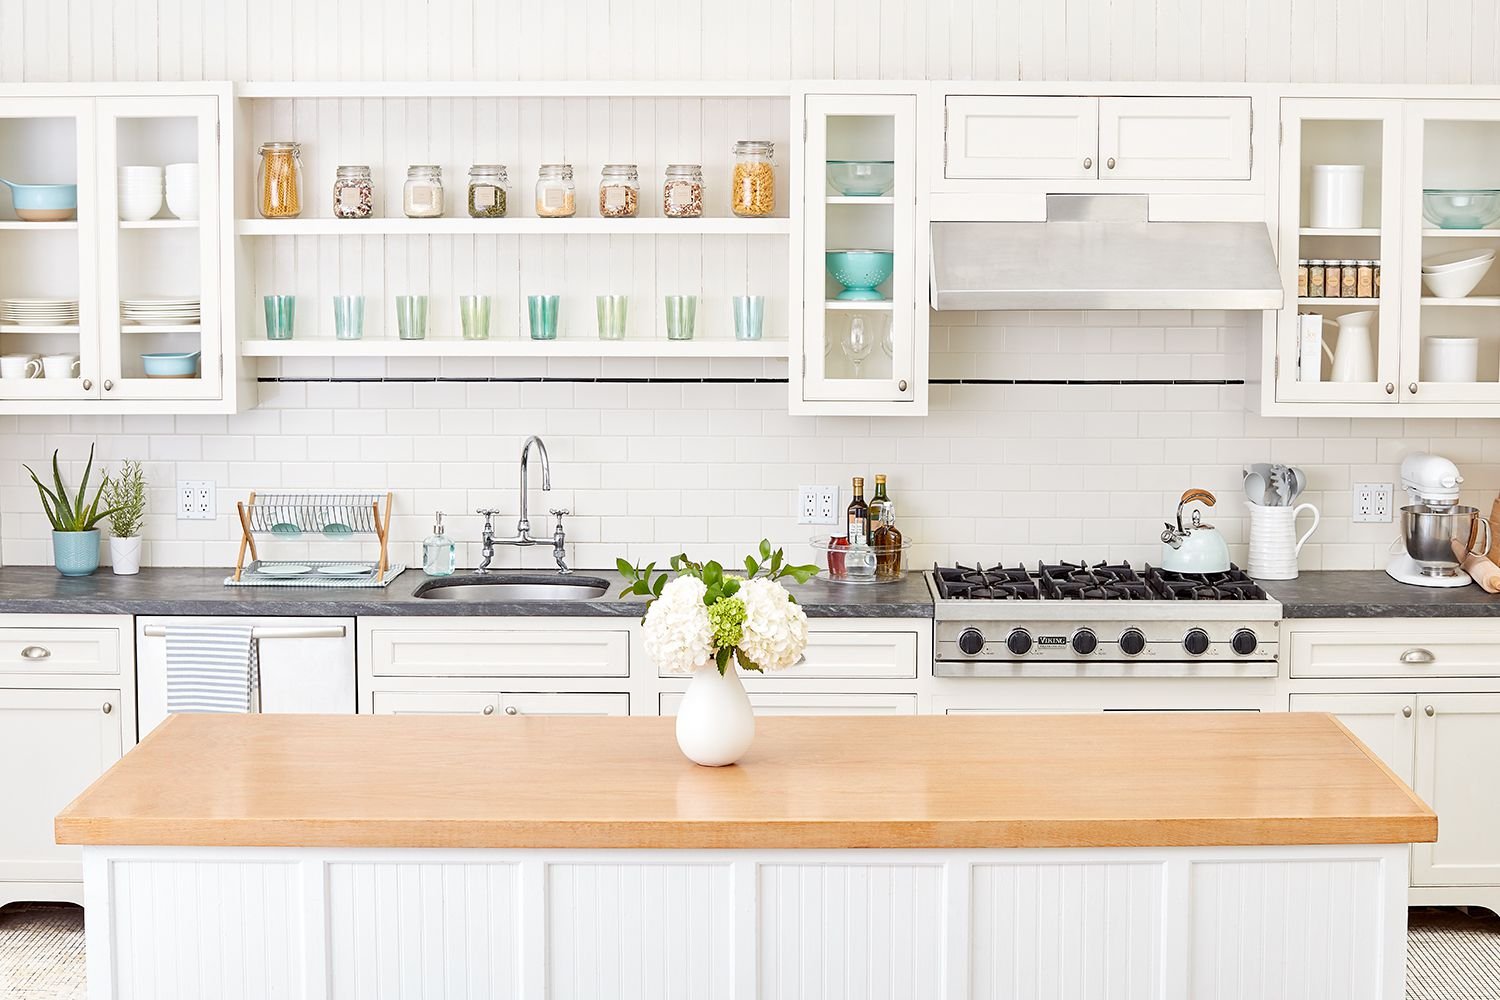 A Checklist for How To Store Every Item You Use in Your Kitchen